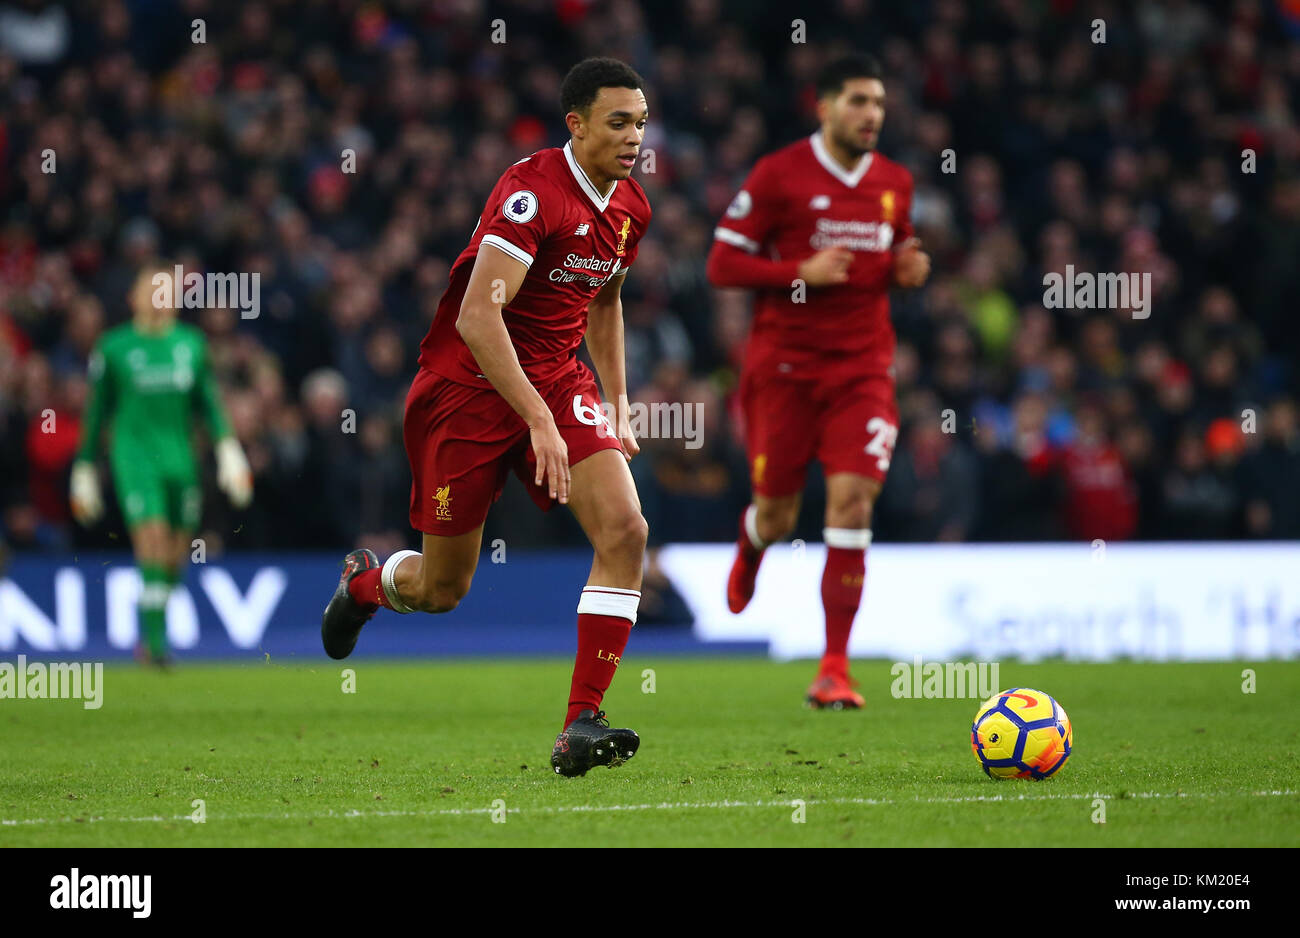 Trent Alexander-Arnold in action during the Premier League match between Brighton and Hove Albion and Liverpool at the American Express Community Stadium in Brighton and Hove. 02 Dec 2017 *** EDITORIAL USE ONLY *** FA Premier League and Football League images are subject to DataCo Licence see www.football-dataco.com Stock Photo